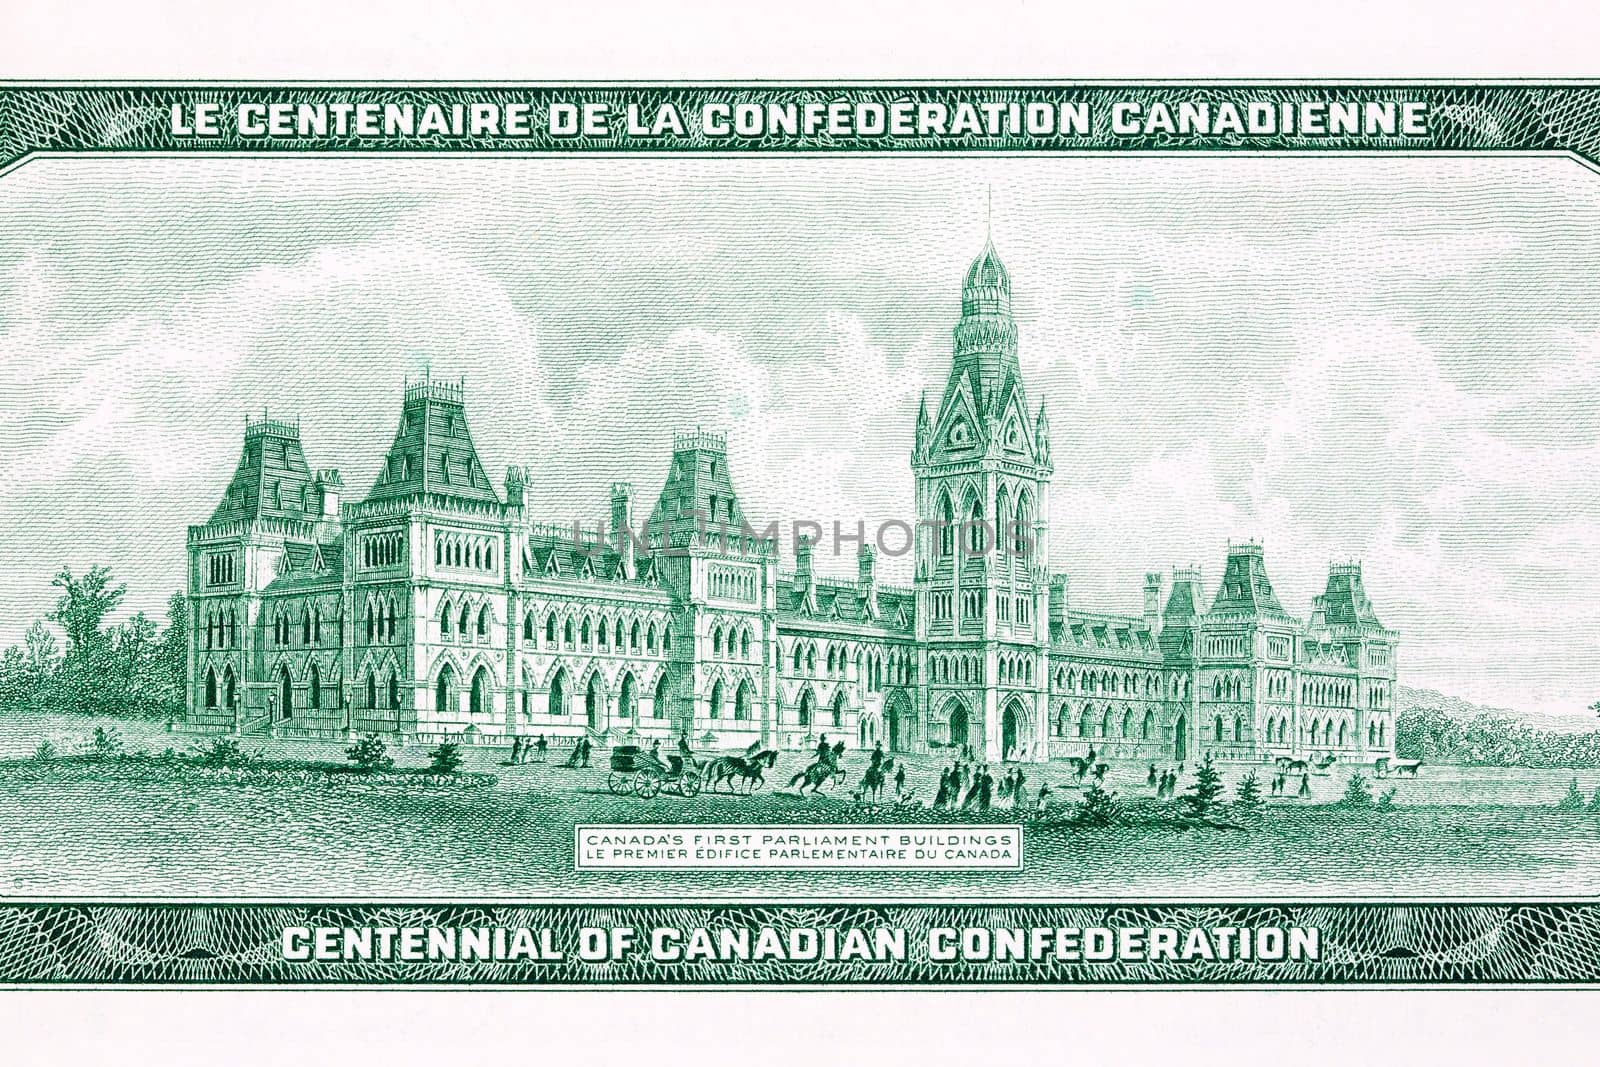 First Parliament Building from old Canadian money by johan10